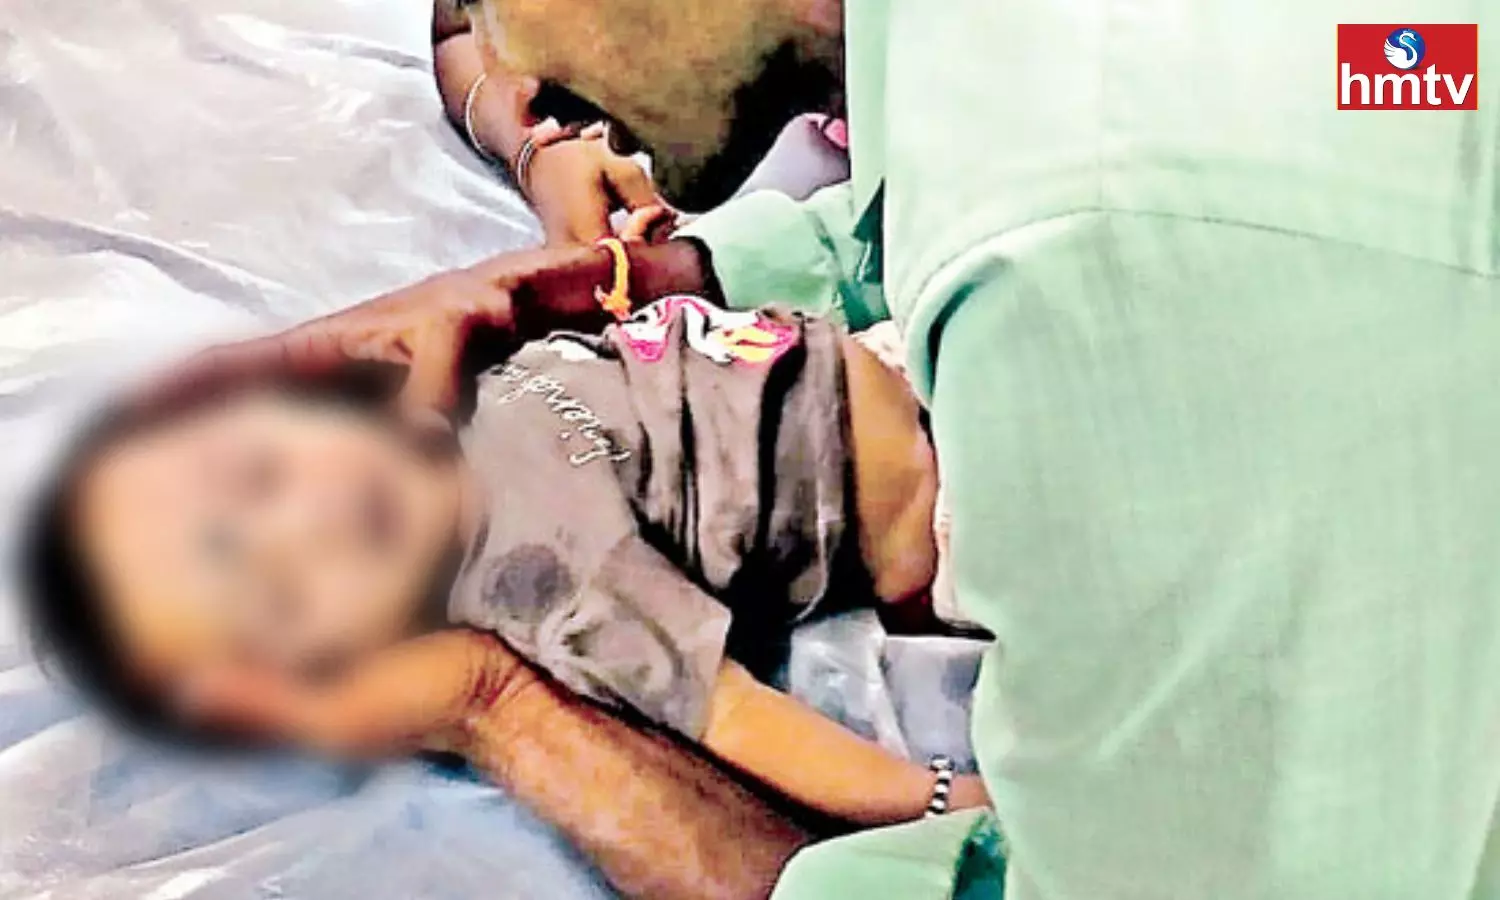 9 Months Old Child Died After Lemon Stuck In Throat In Anantapur